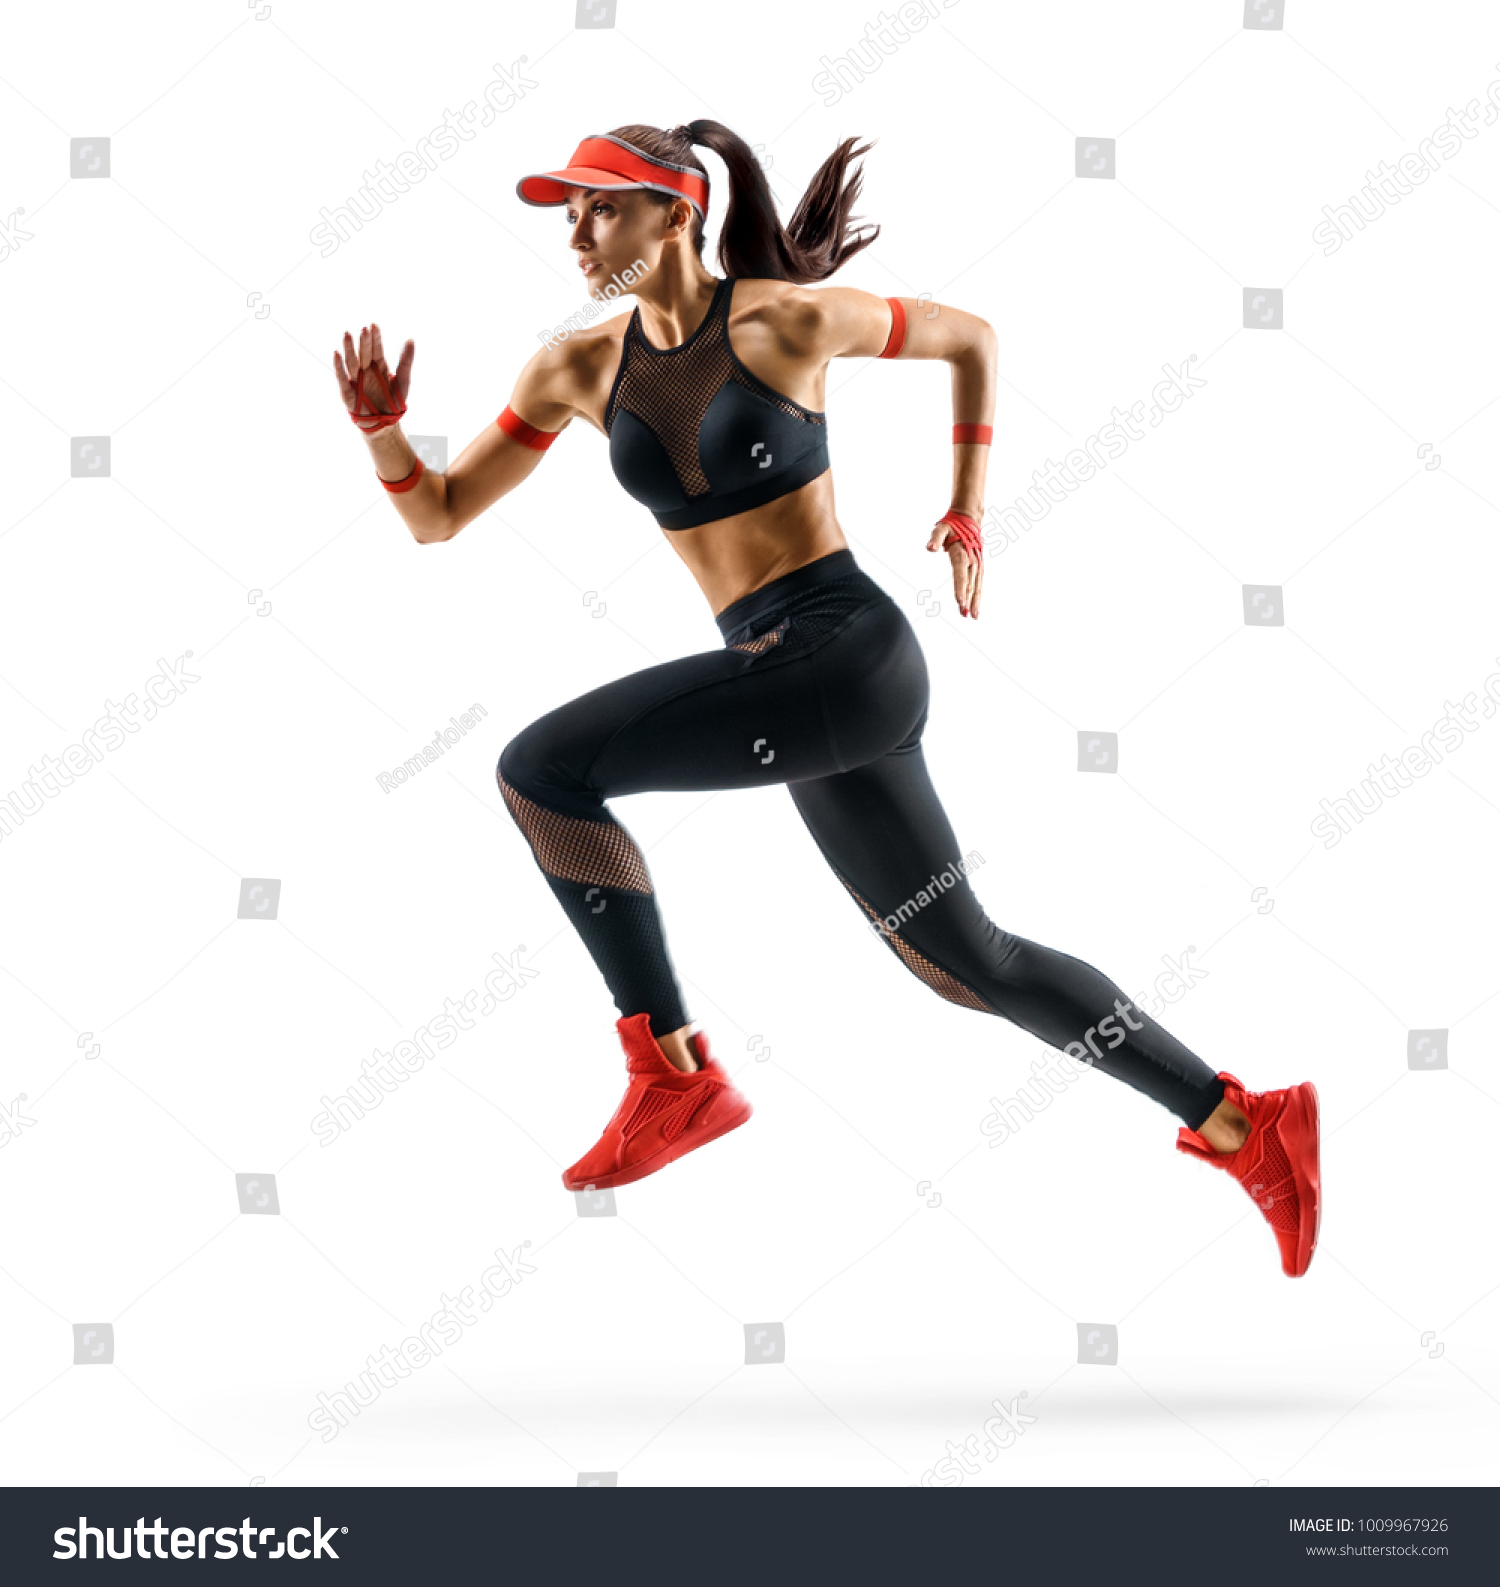 Woman runner in silhouette on white background. Dynamic movement. Side view #1009967926